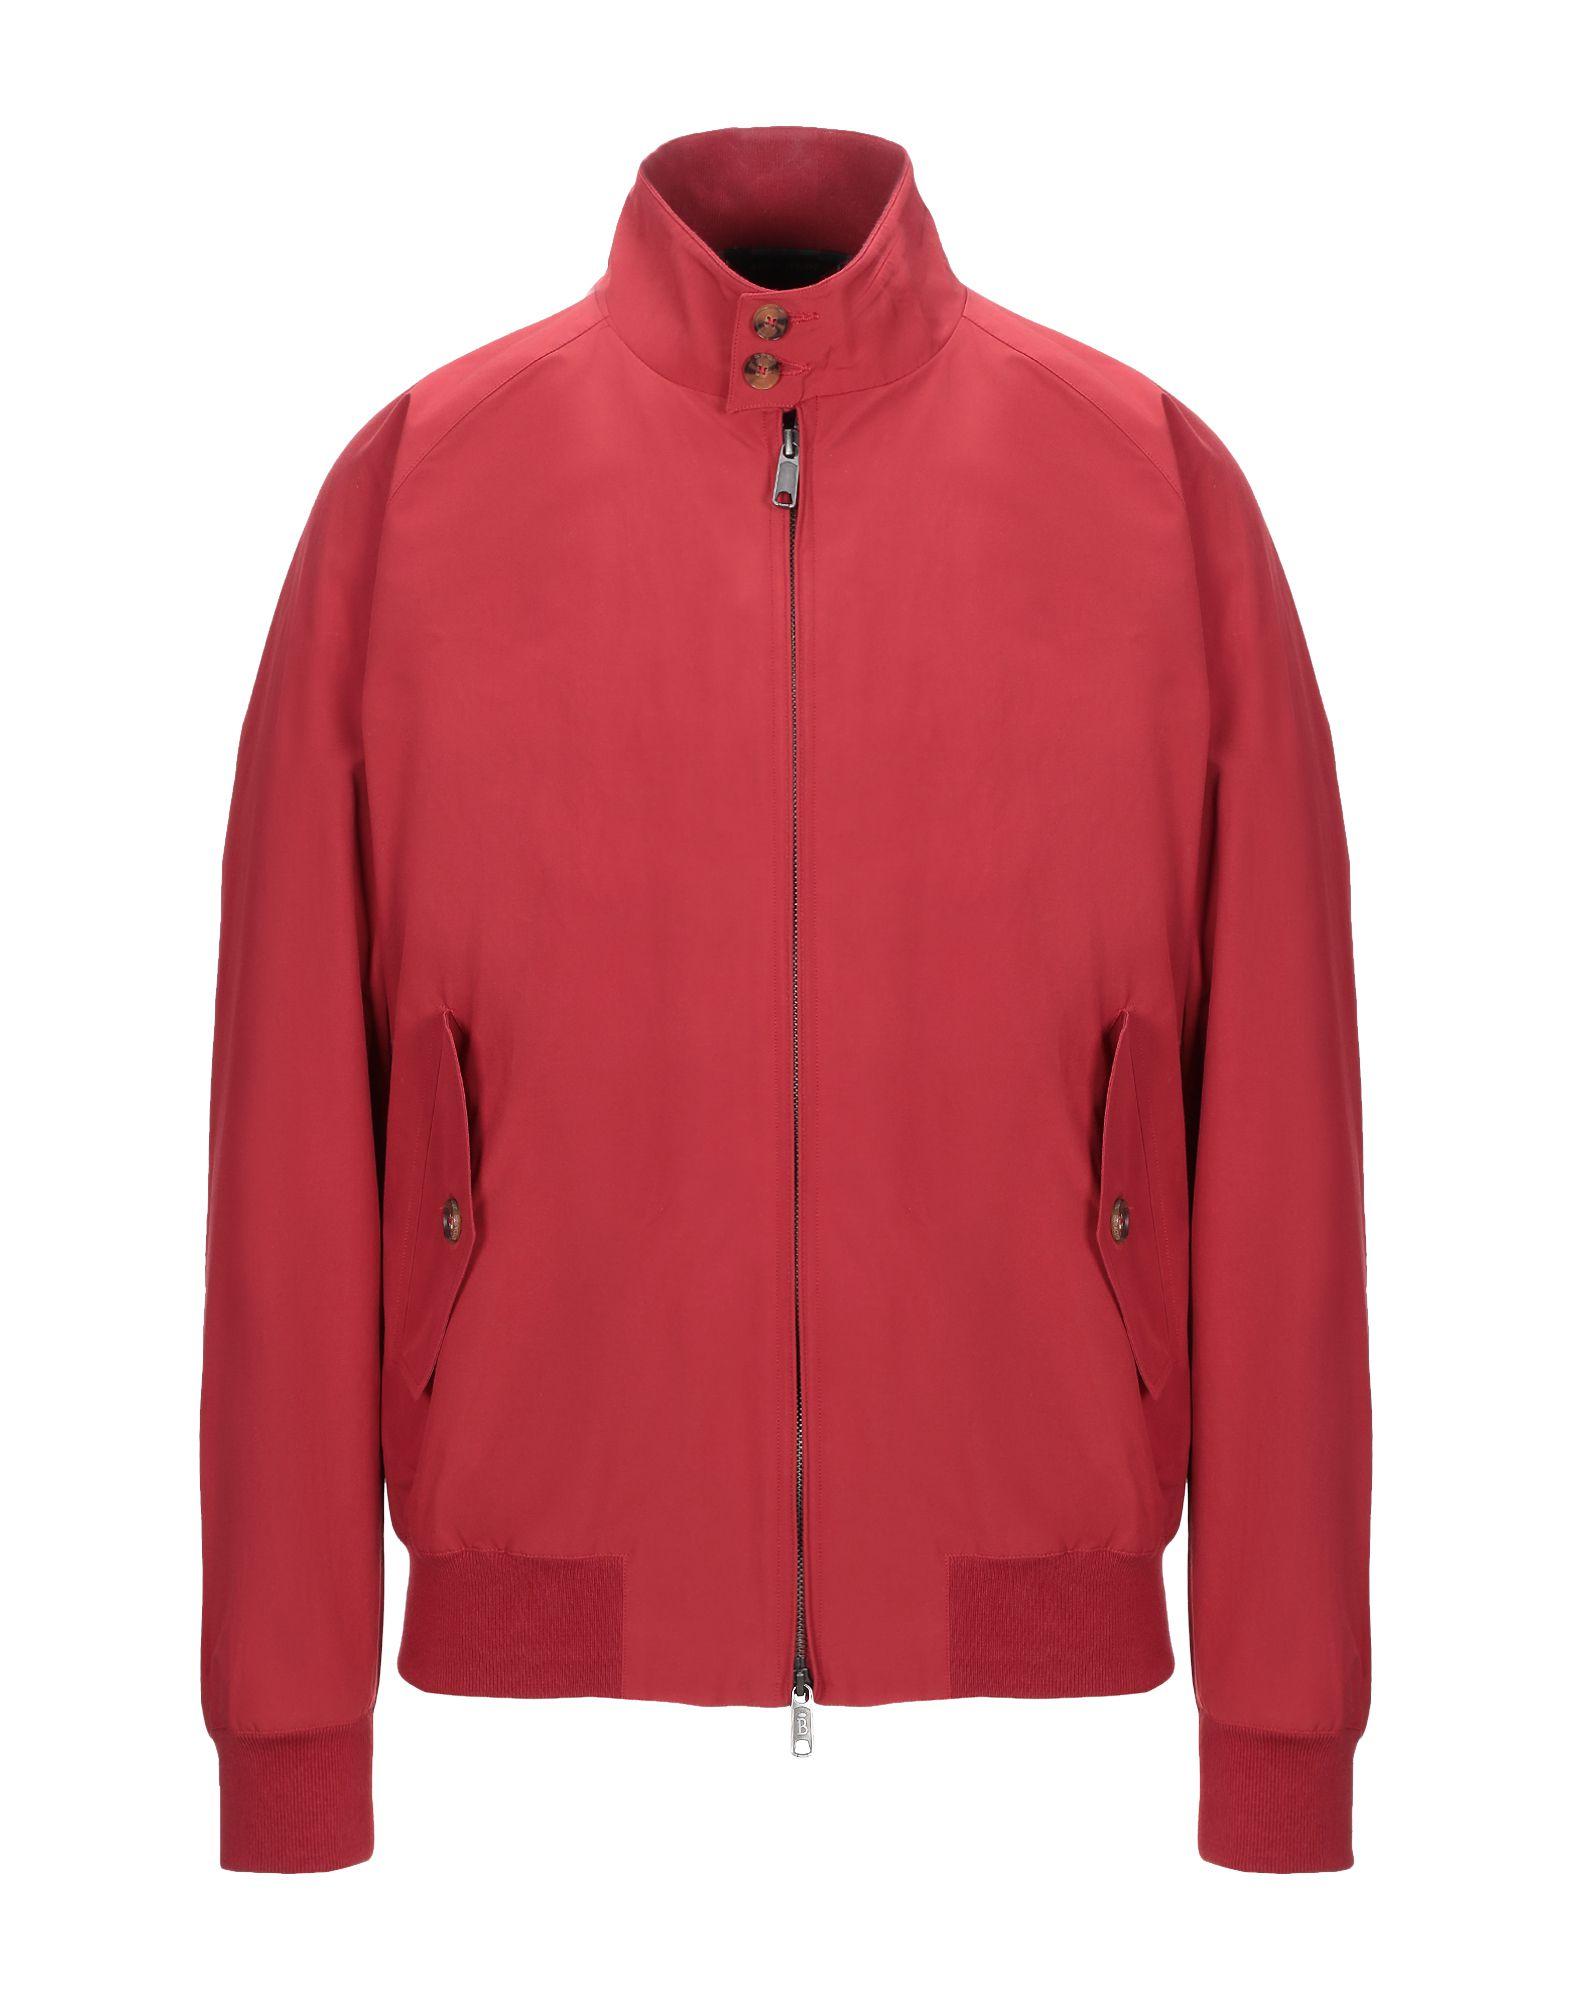 Baracuta Cotton Jacket in Red for Men - Lyst